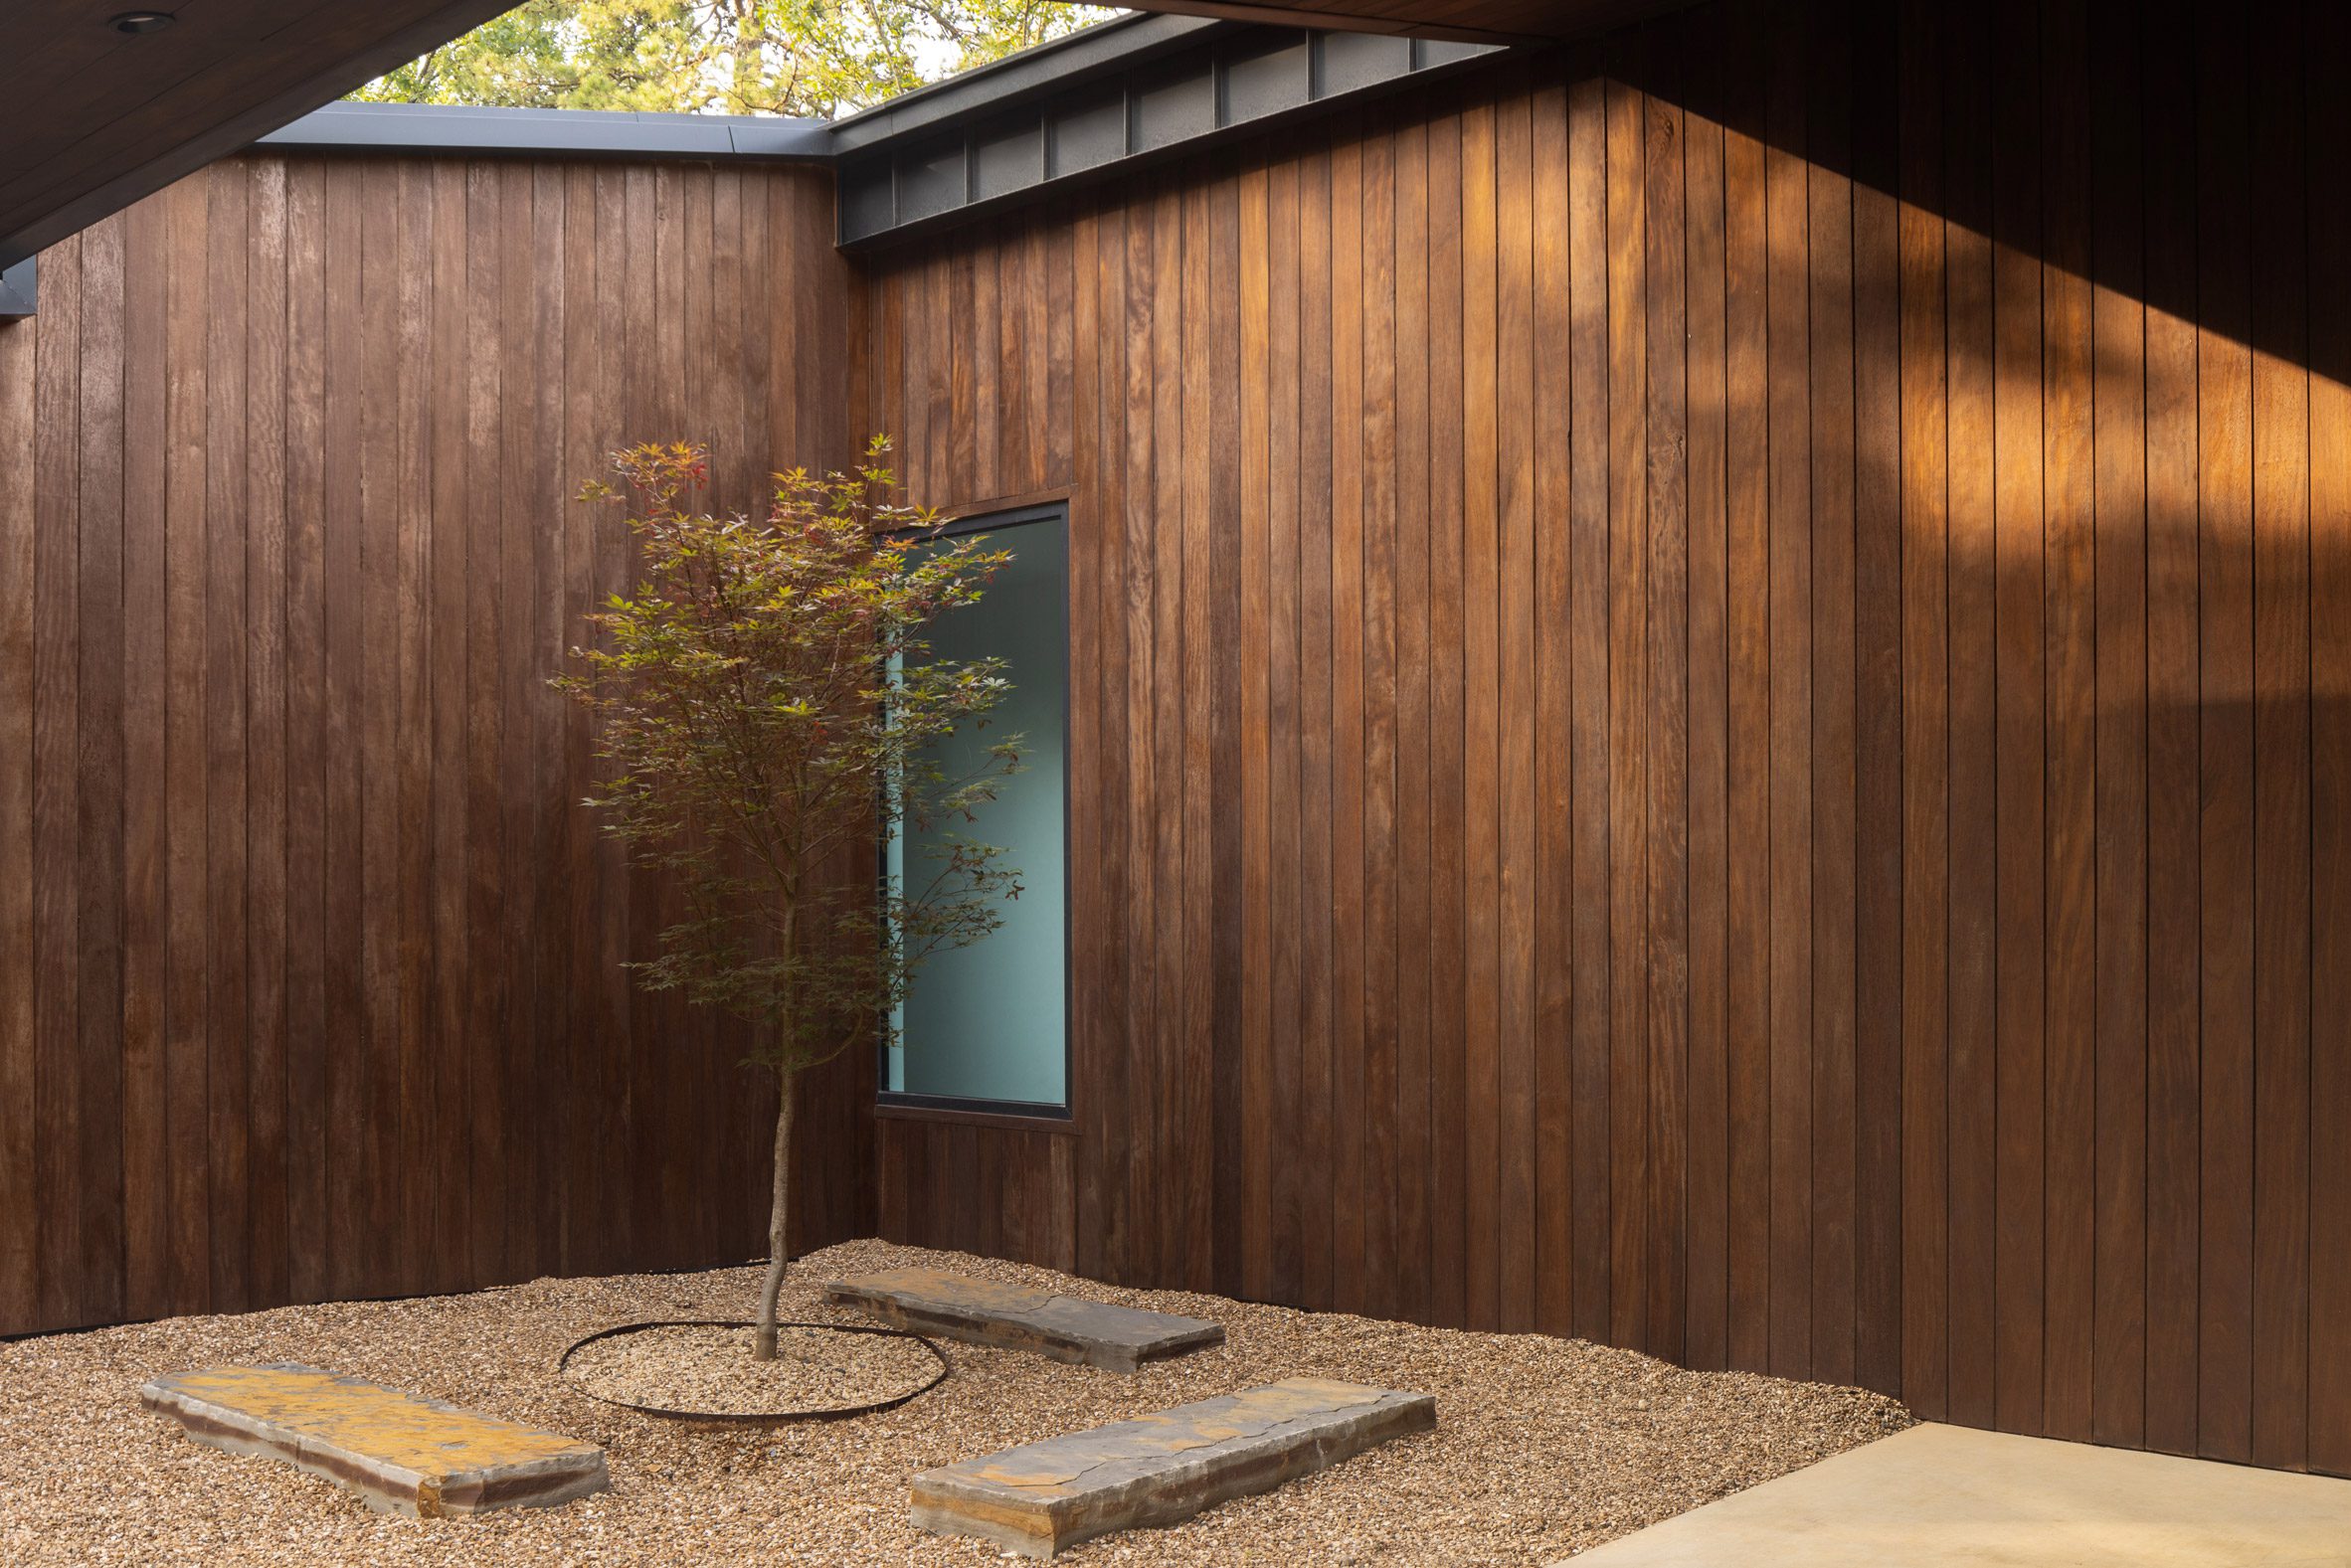 Courtyard and void in Oklahoma cabin by Far + Dang